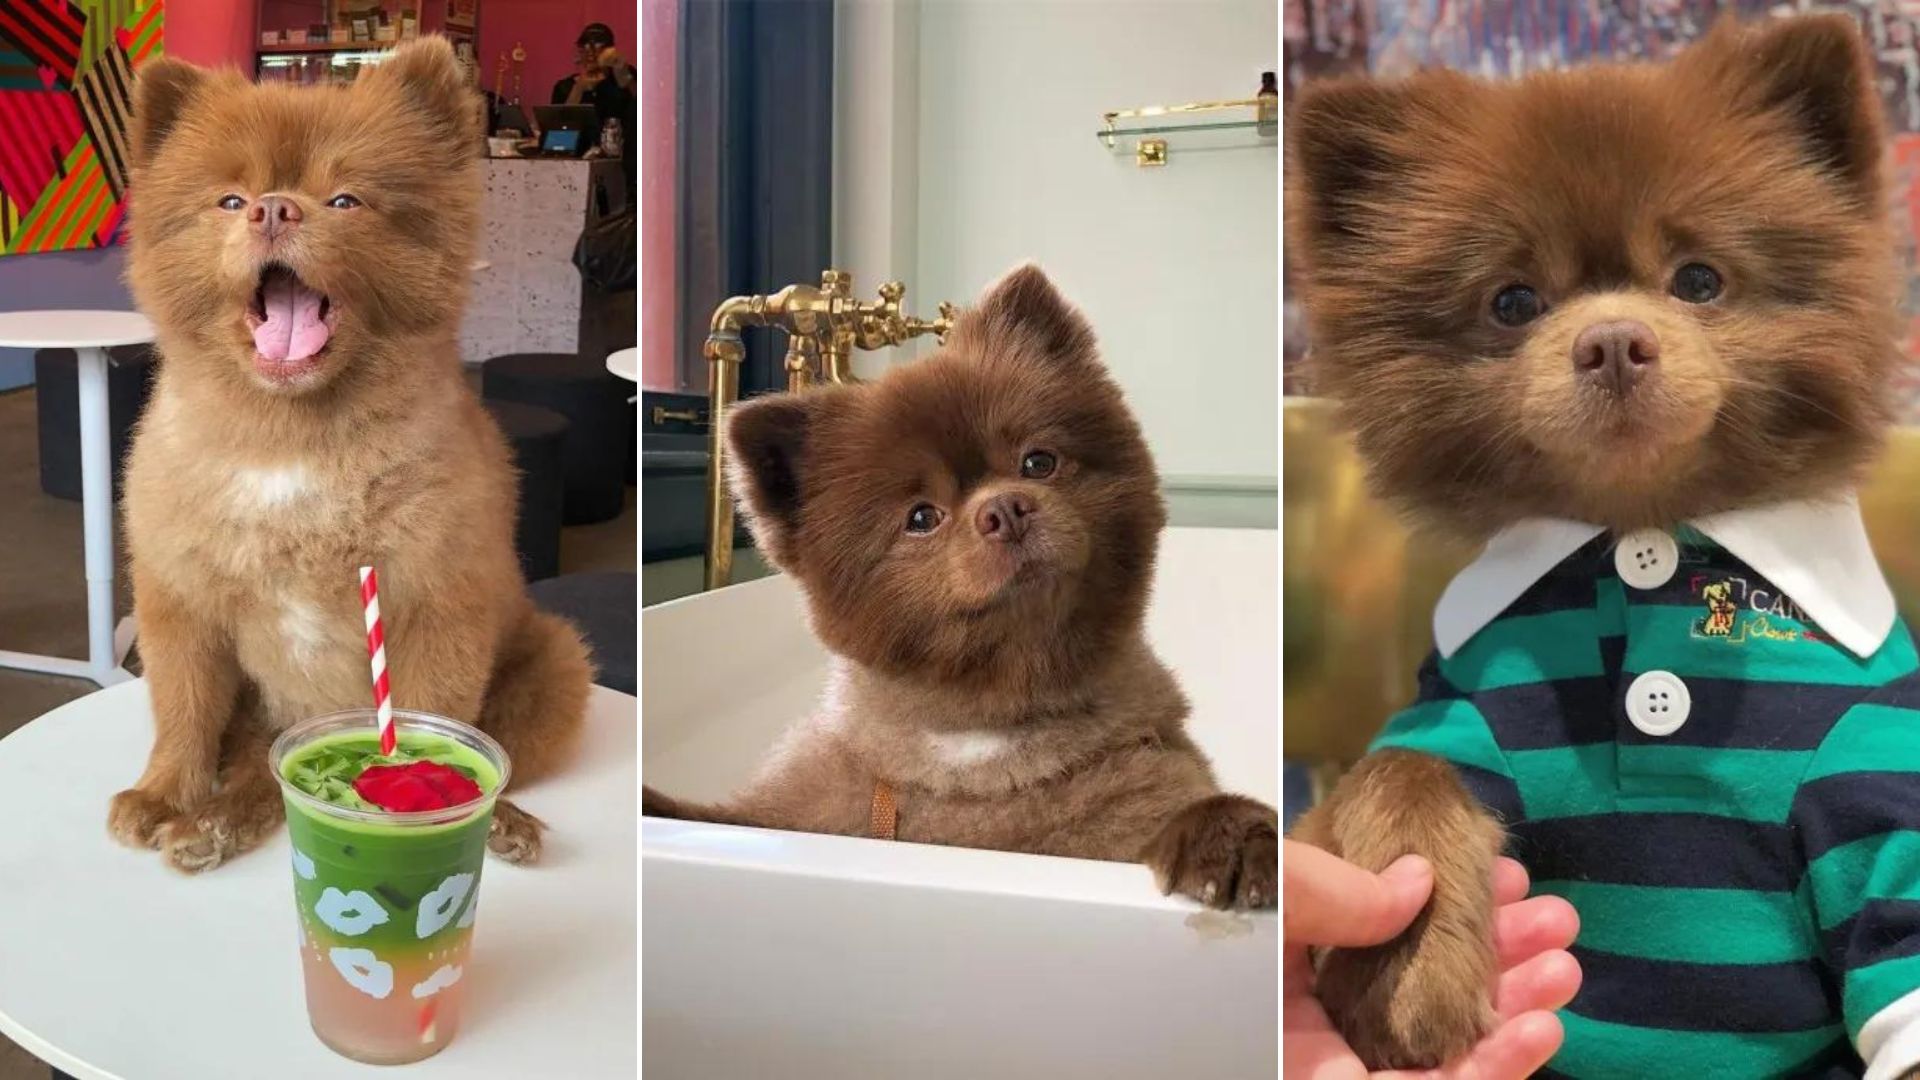 This Adorable Chocolate Pomeranian Is Literally A Real-Life Teddy Bear